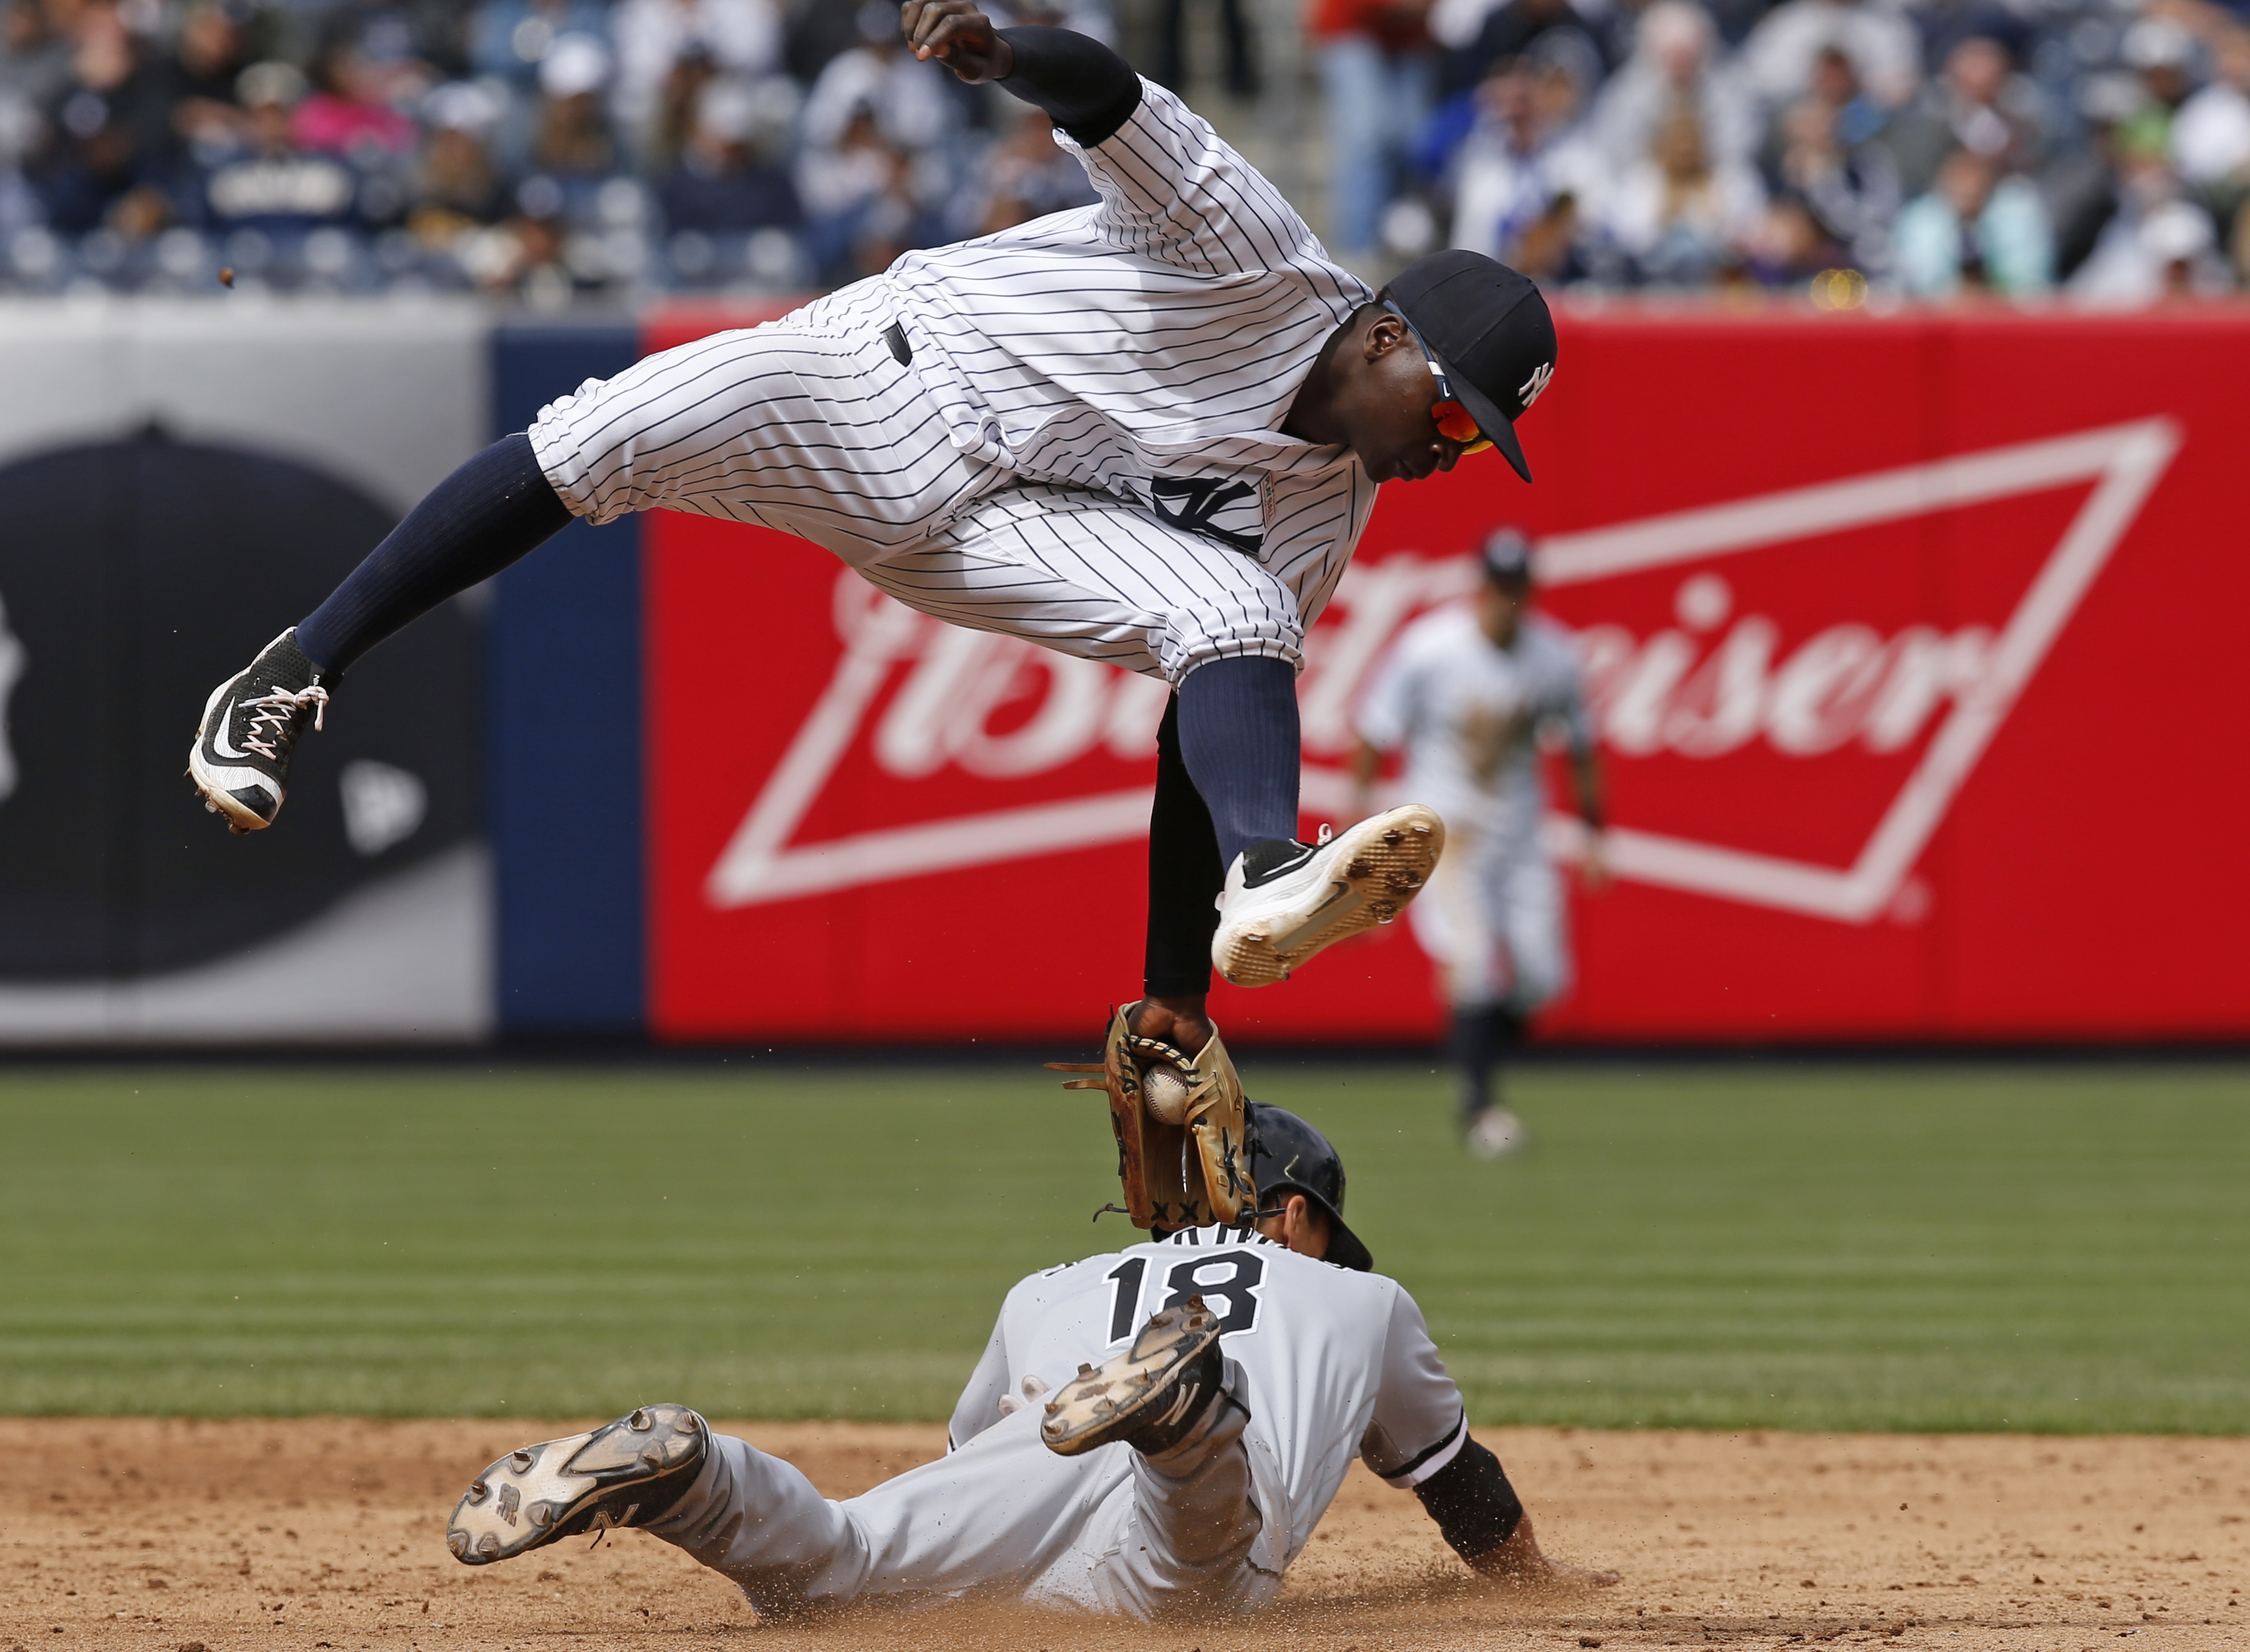 Getting Didi Gregorius back will be huge for the Yankees